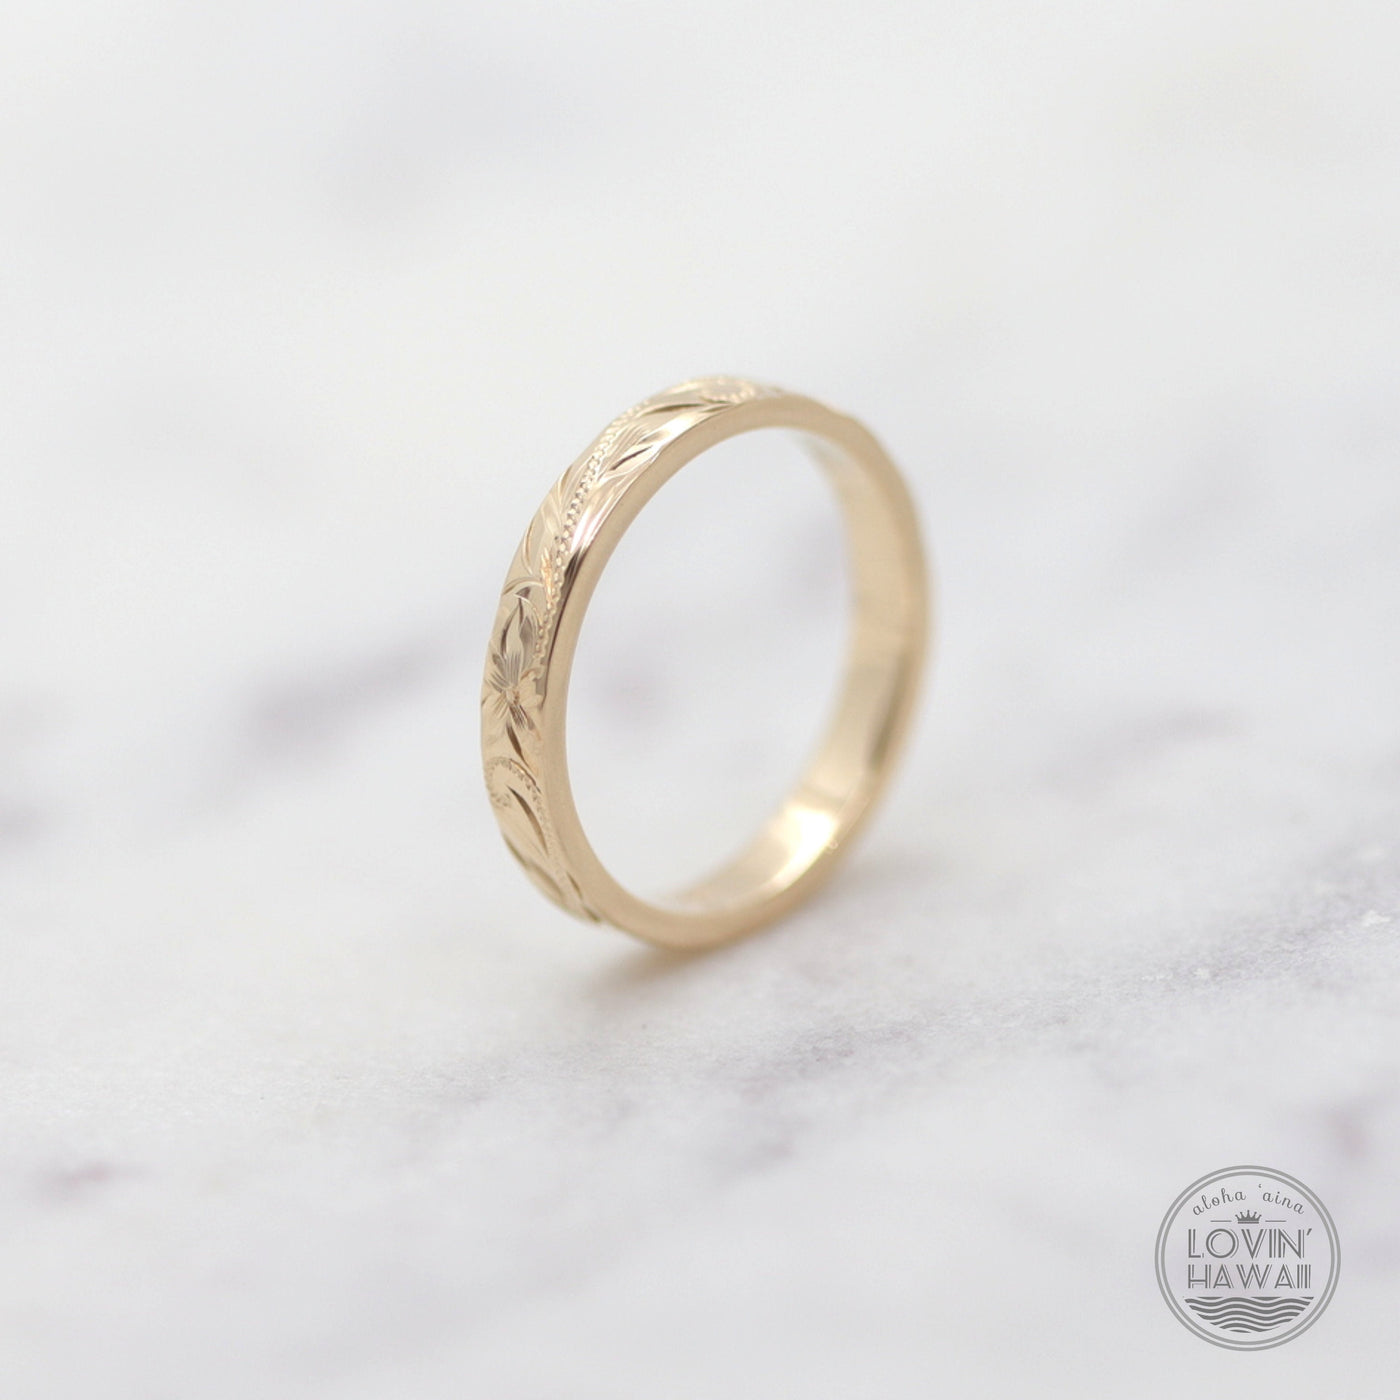 Dainty yellow gold ring